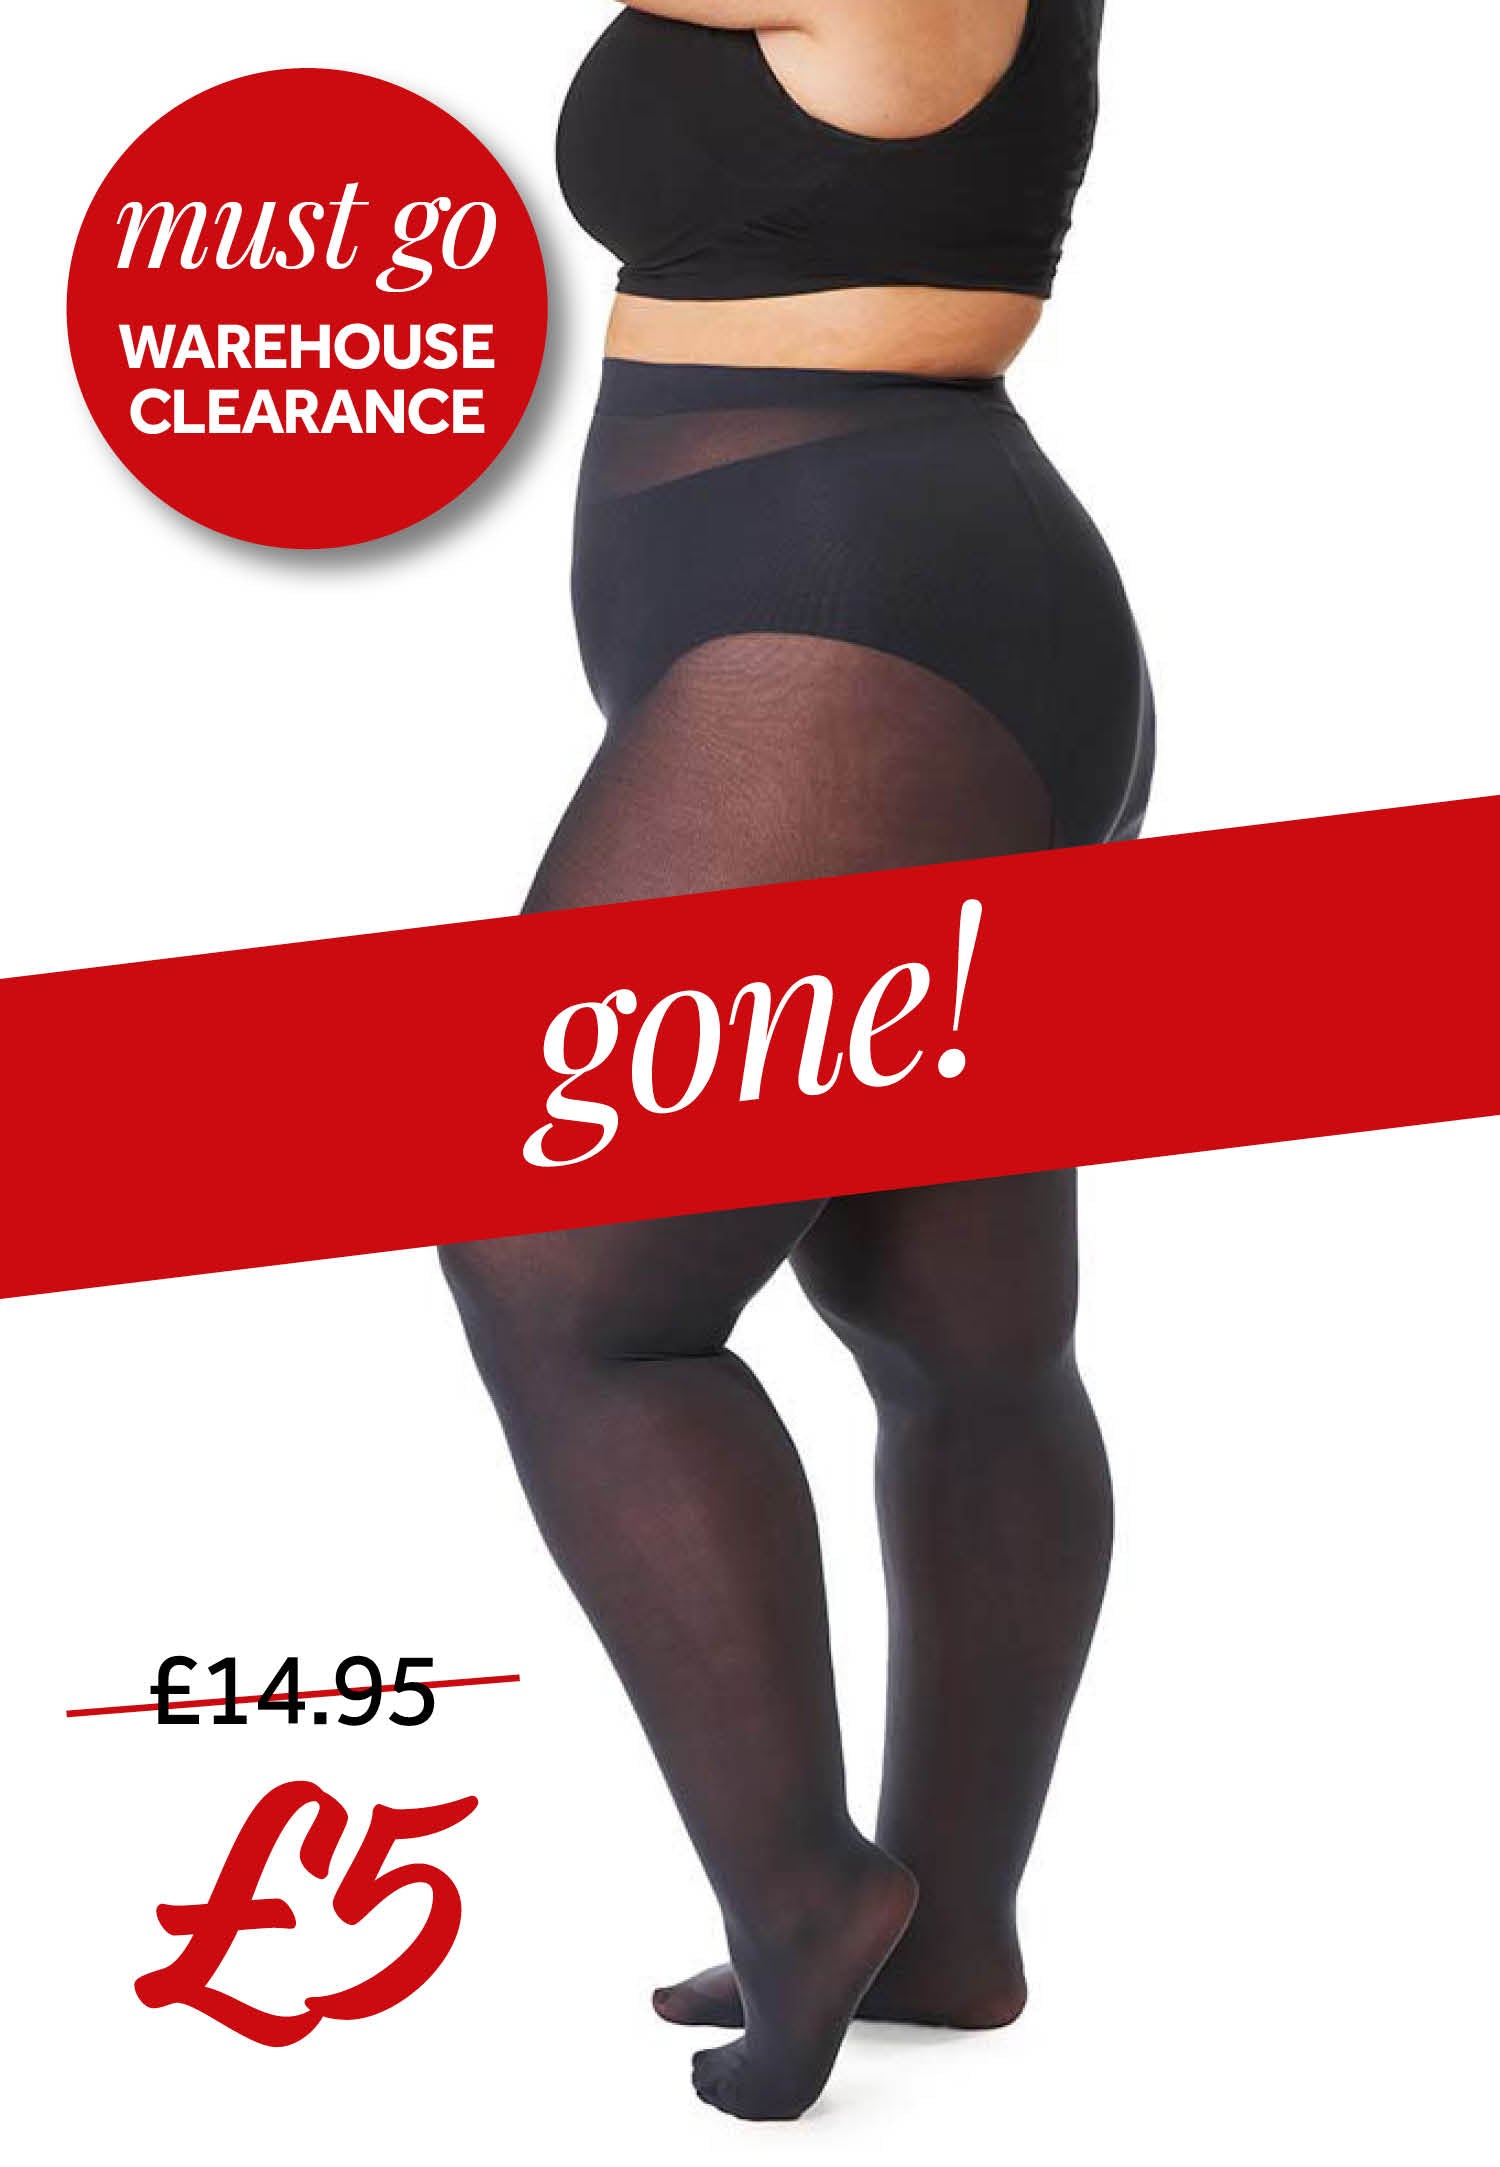 All Woman 50 denier tights - Nearly Black - CLEARANCE